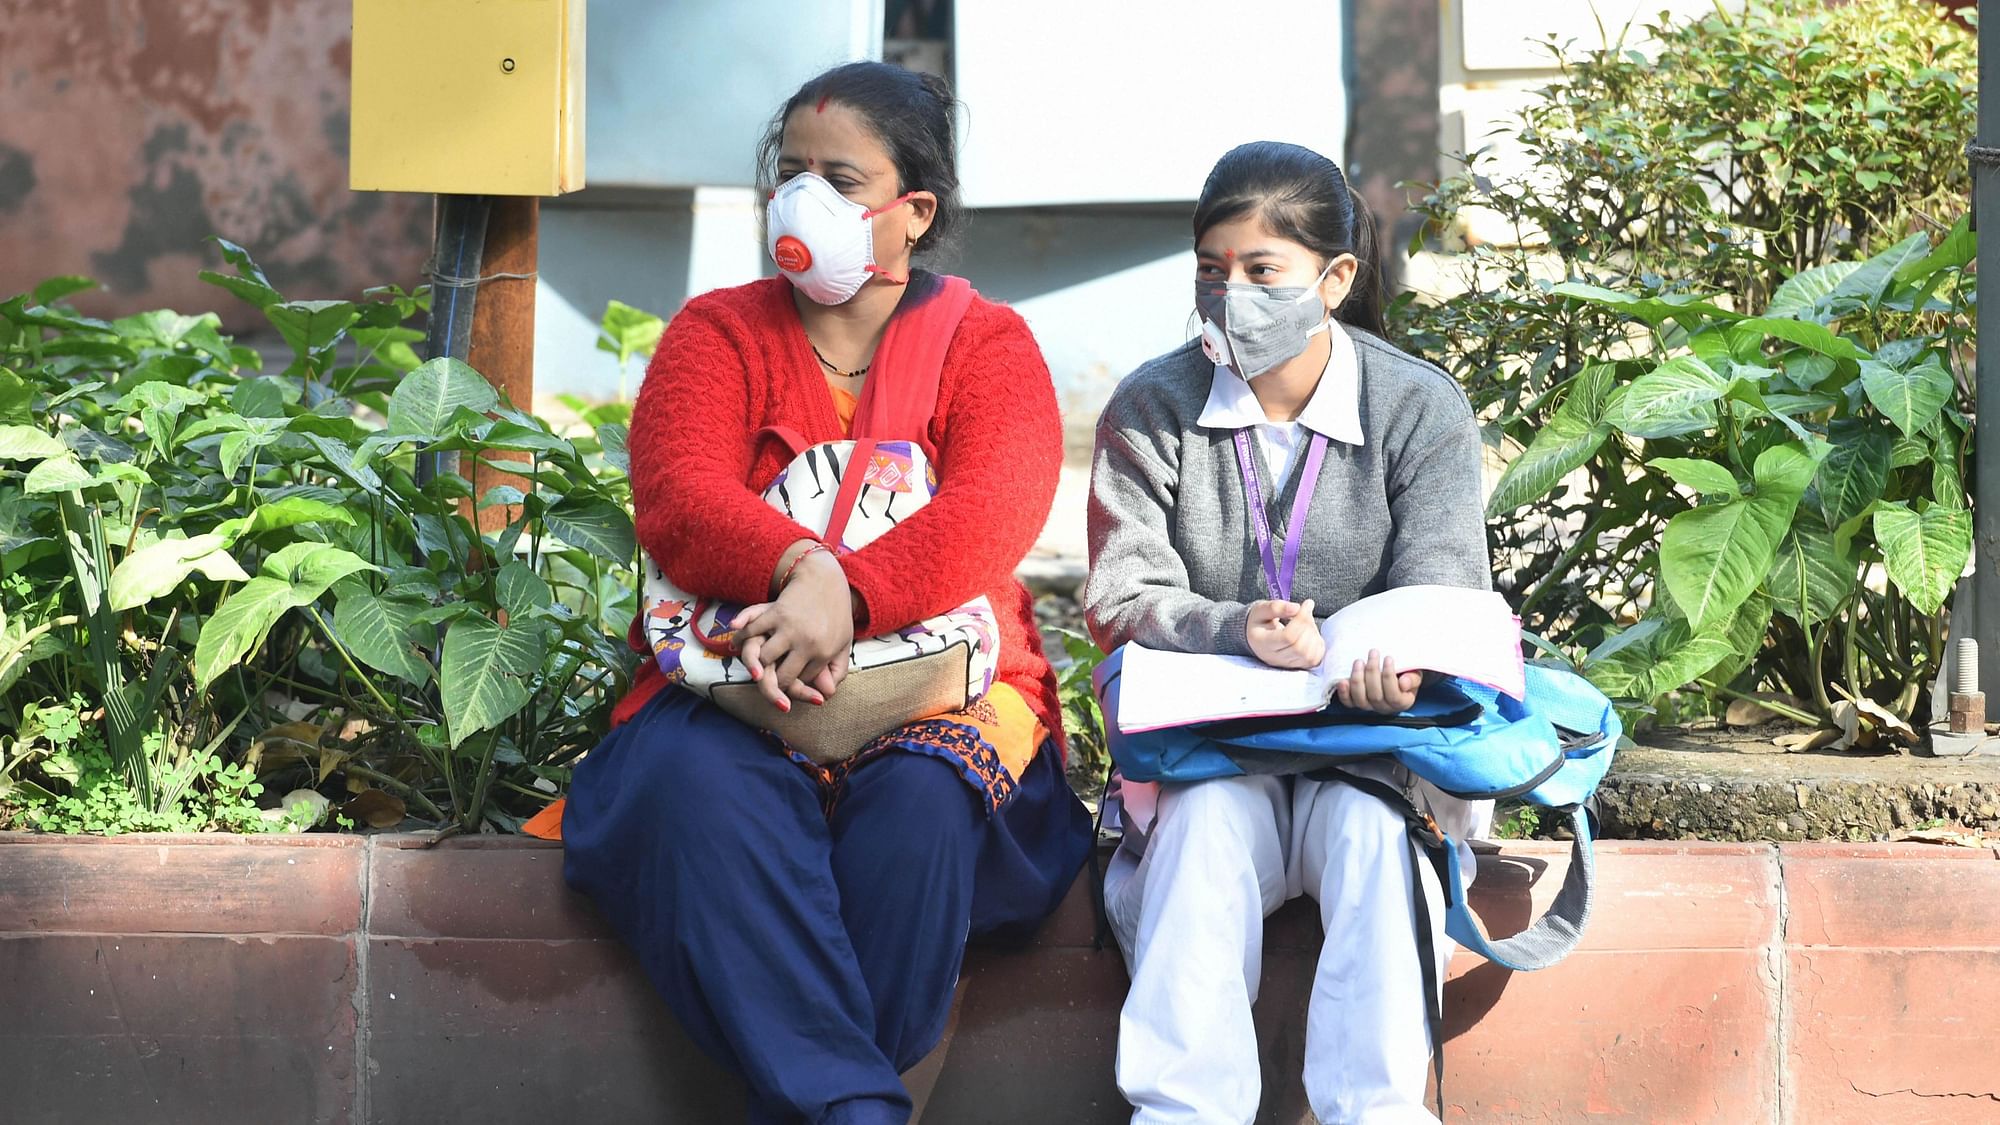 A student with her family member wear masks amid coronavirus fears, as they wait outside Kerala School ahead for their CBSE Class 10 exams, in New Delhi, Wednesday, March 18, 2020